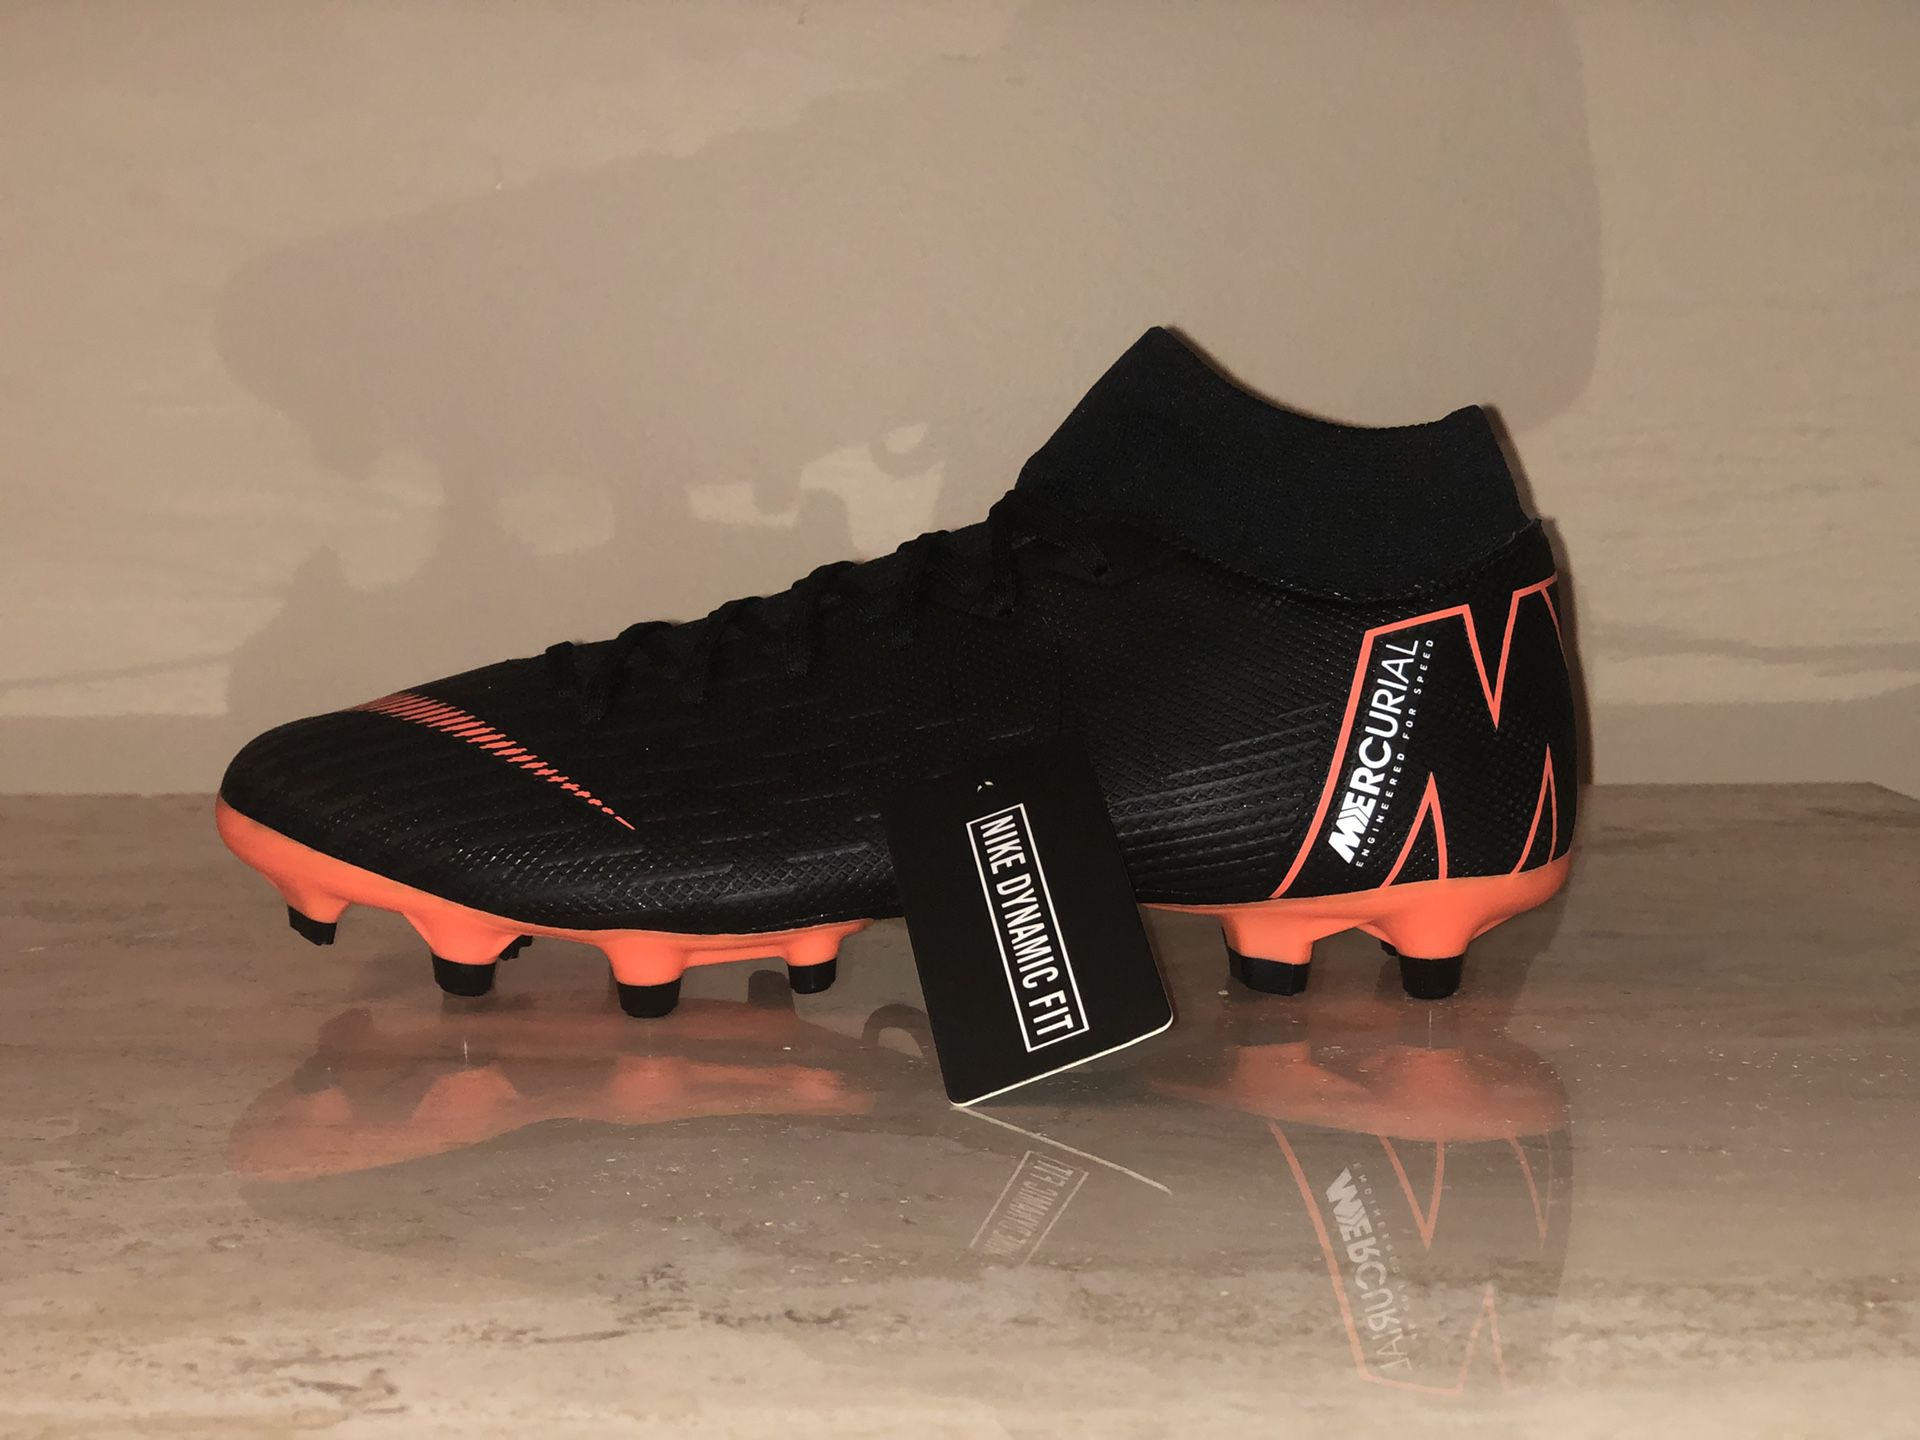 Lucro horno Fascinante Nike Mercurial Superfly 6 Academy MG Cleats Black/Orange AH7362-081 sz US  5, 5.5 for Sale in Brecksville, OH - OfferUp